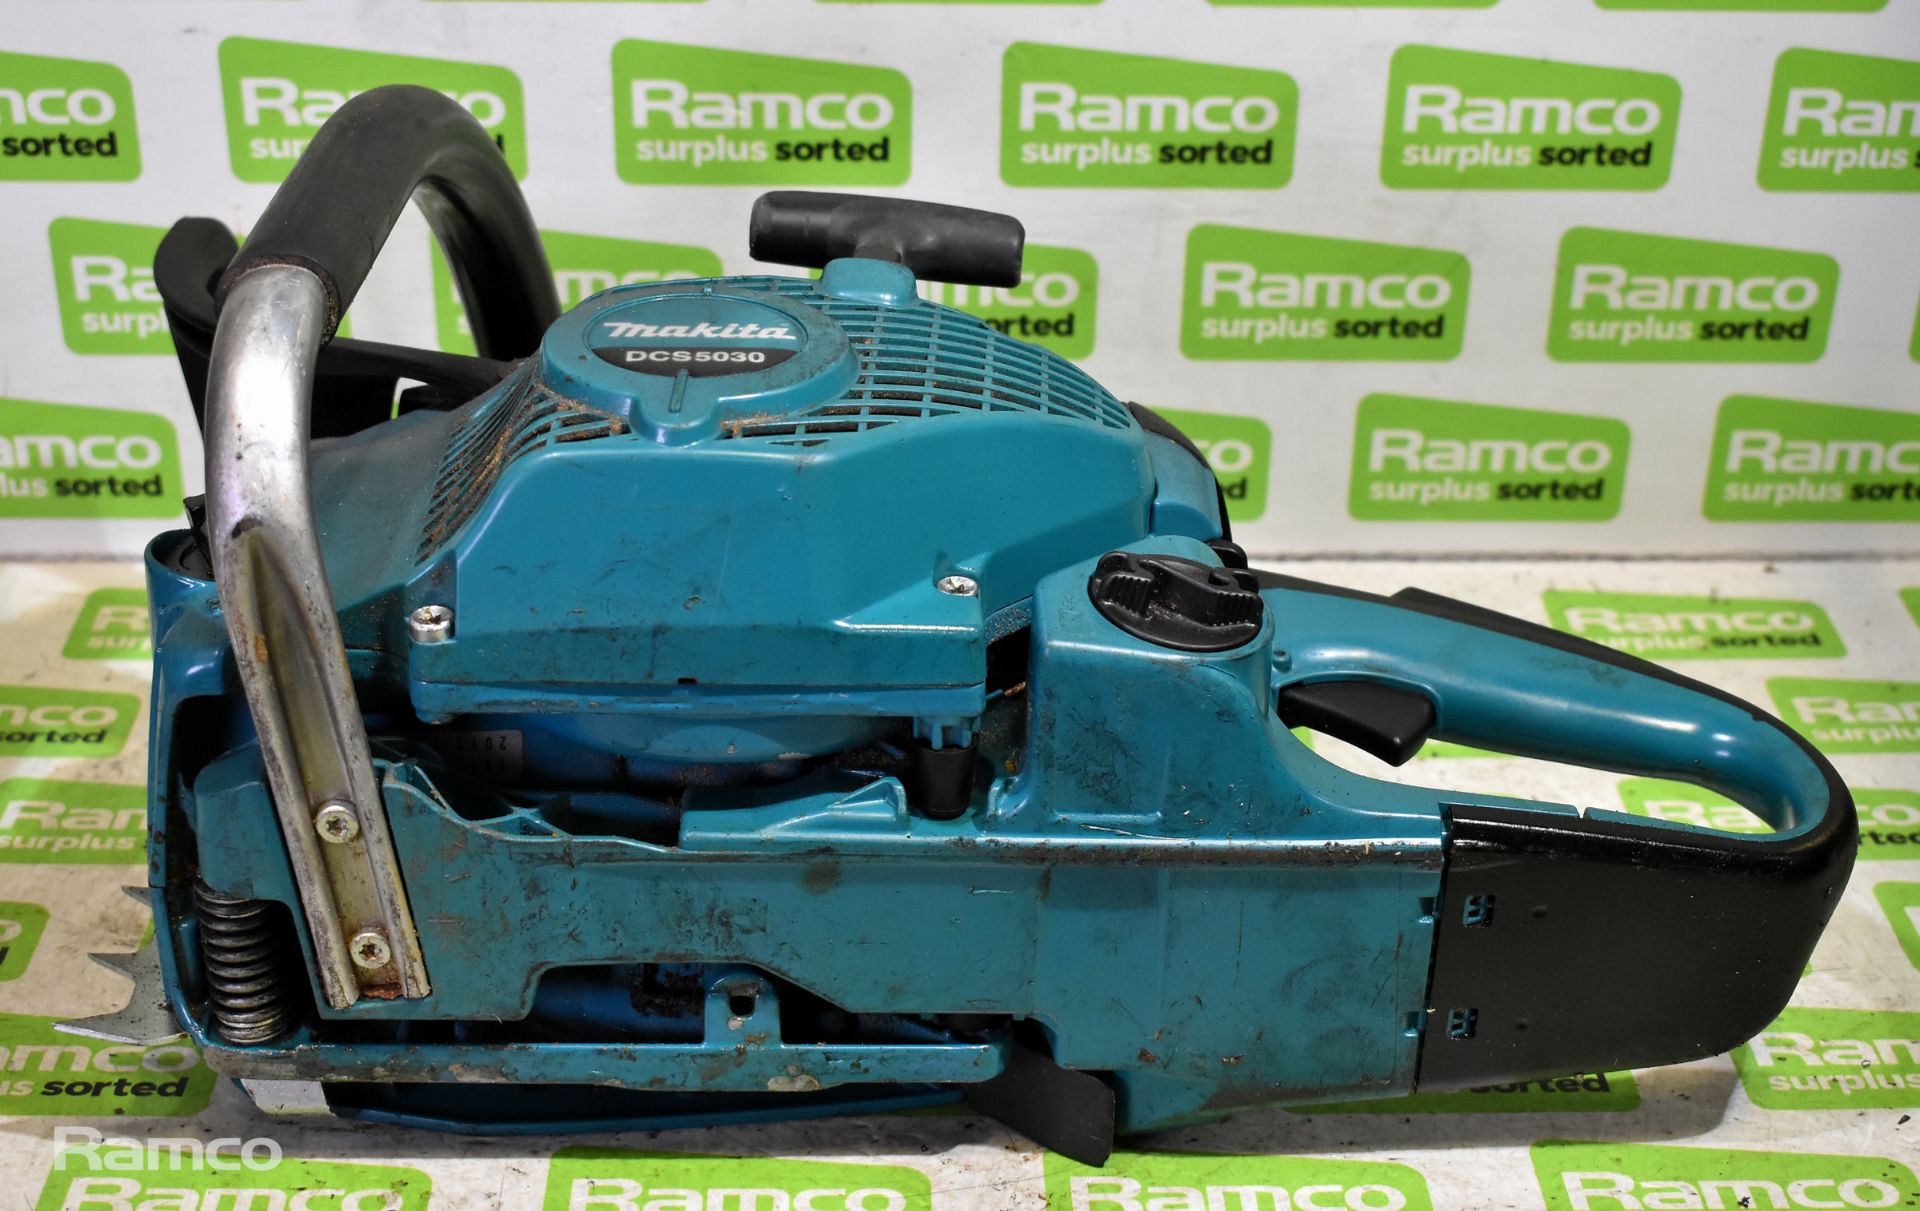 4x Makita DCS5030 50cc petrol chainsaws - BODIES ONLY - AS SPARES OR REPAIRS - Image 11 of 21